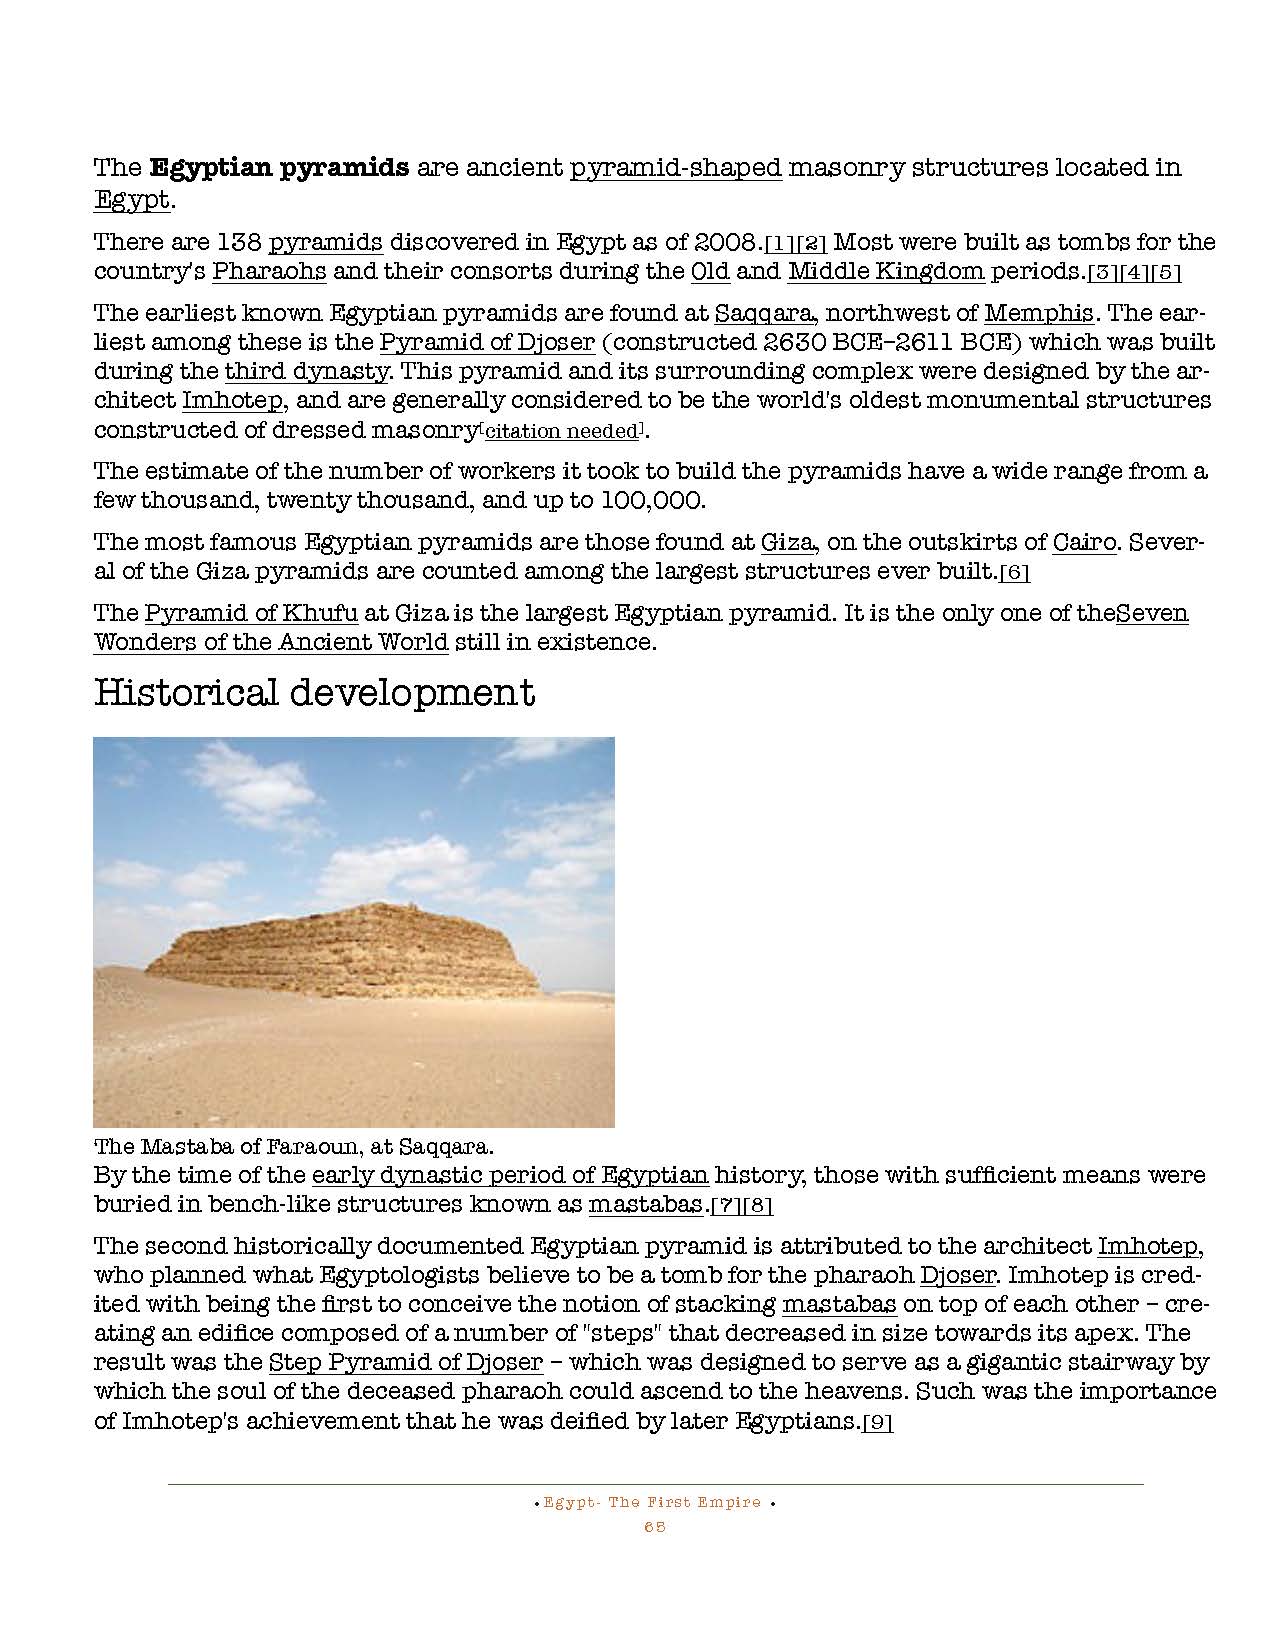 HOCE- Egypt  (First Empire) Notes_Page_065.jpg